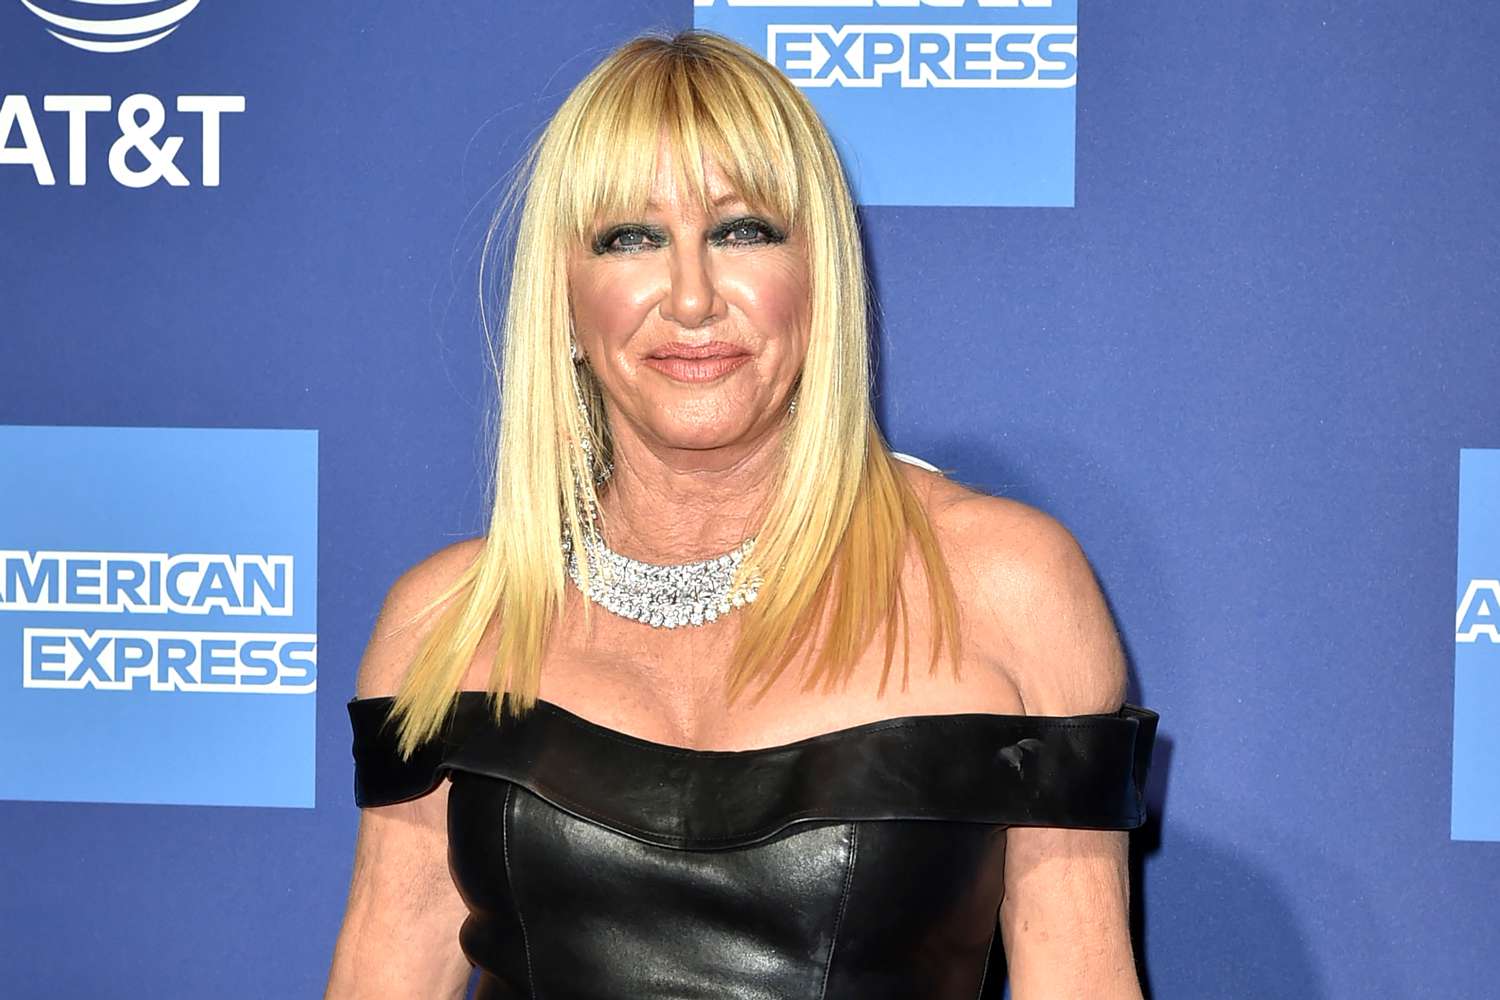 alisha monroe recommends suzanne somers tits pic